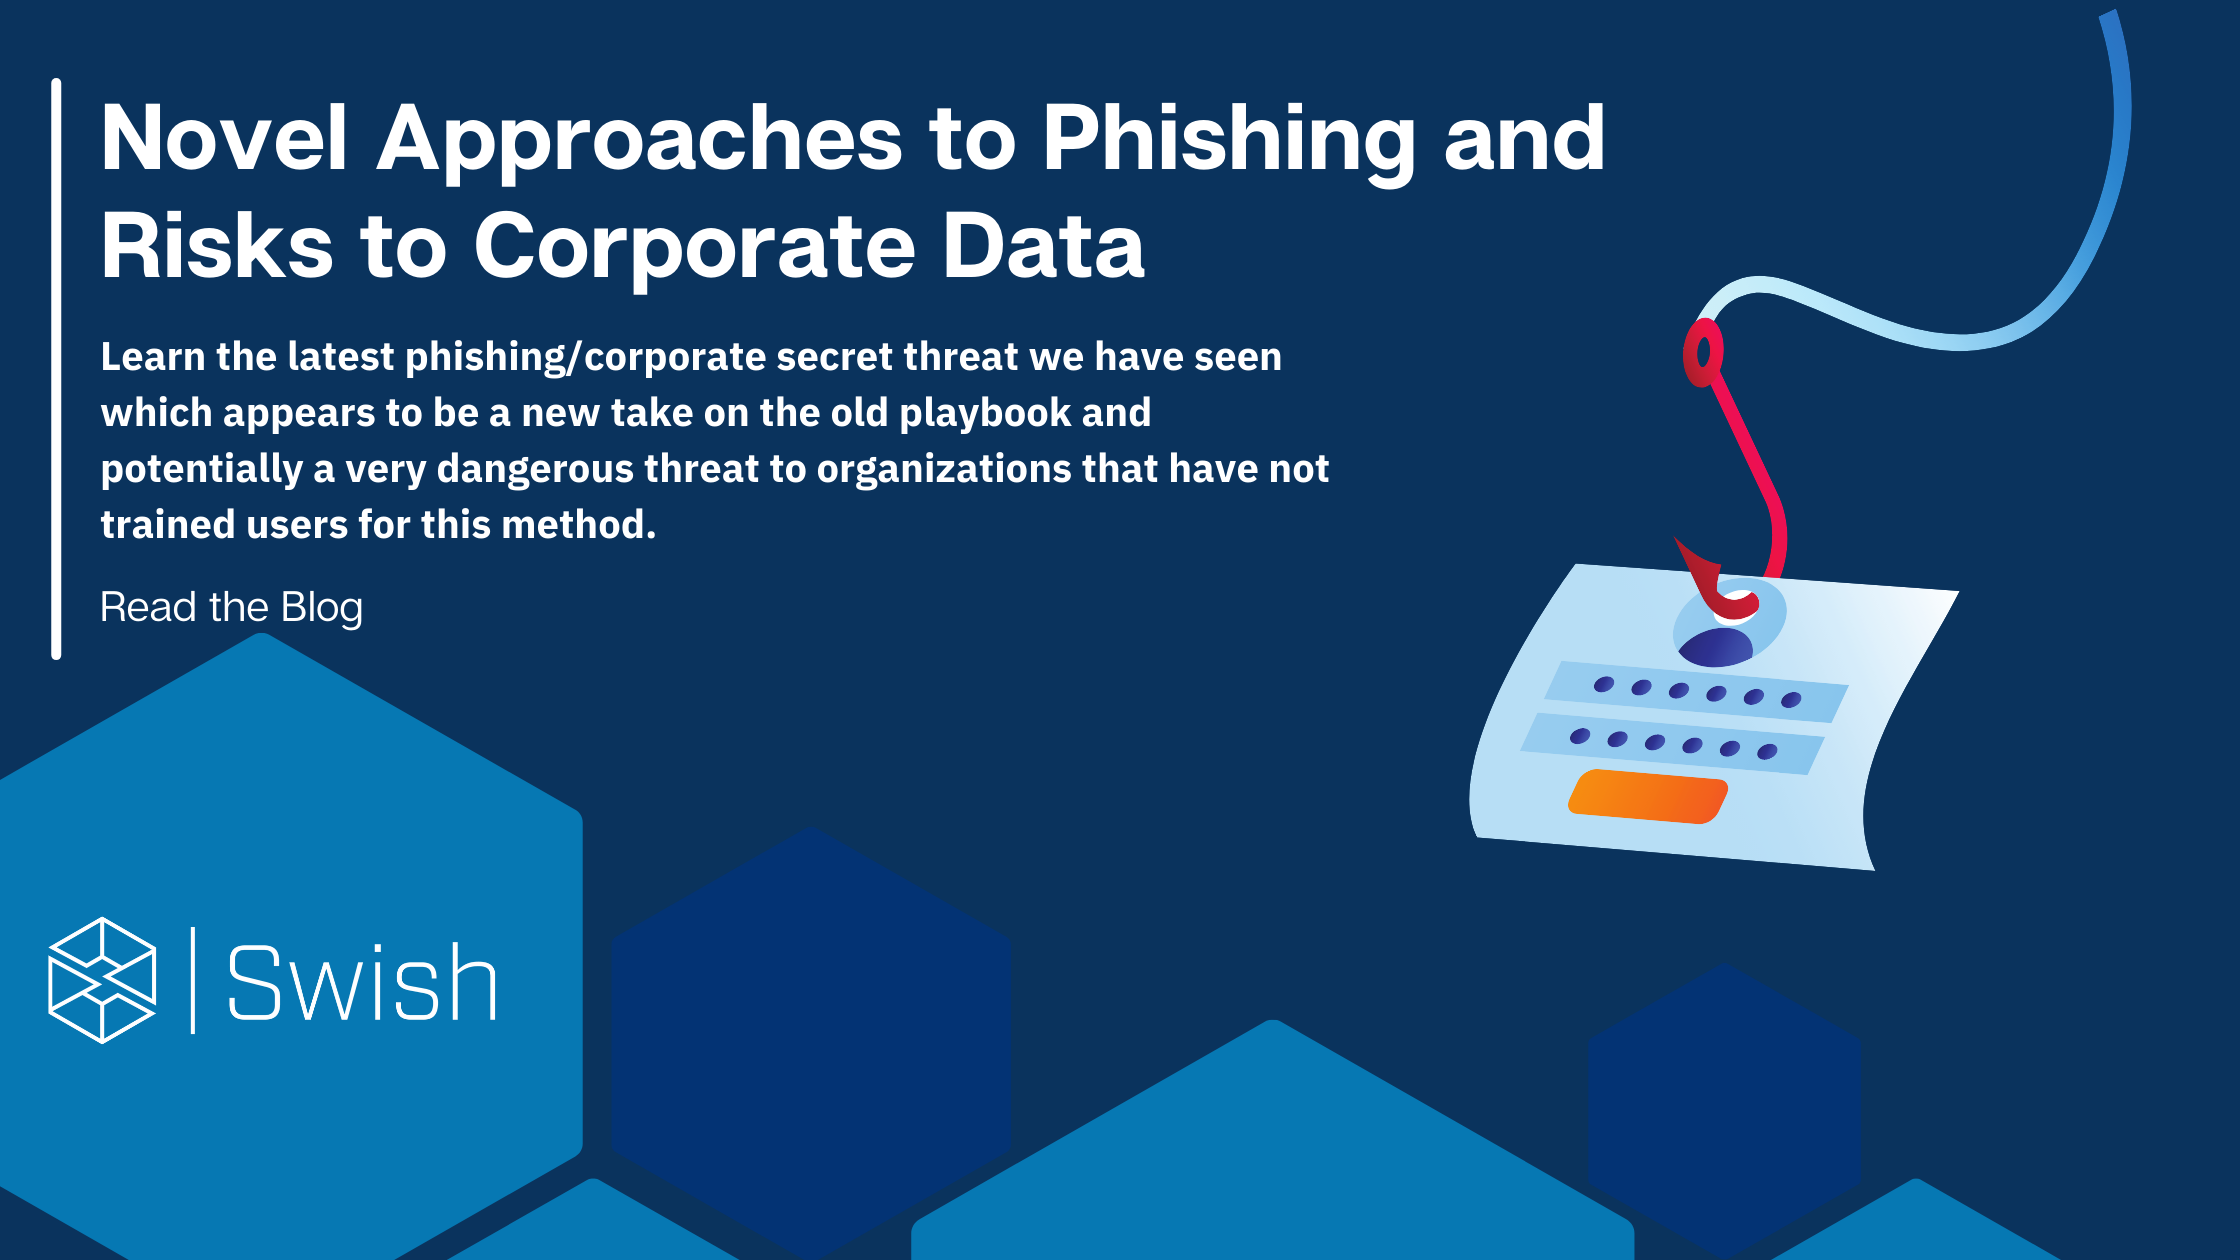 Novel Approaches to Phishing and Risks to Corporate Data